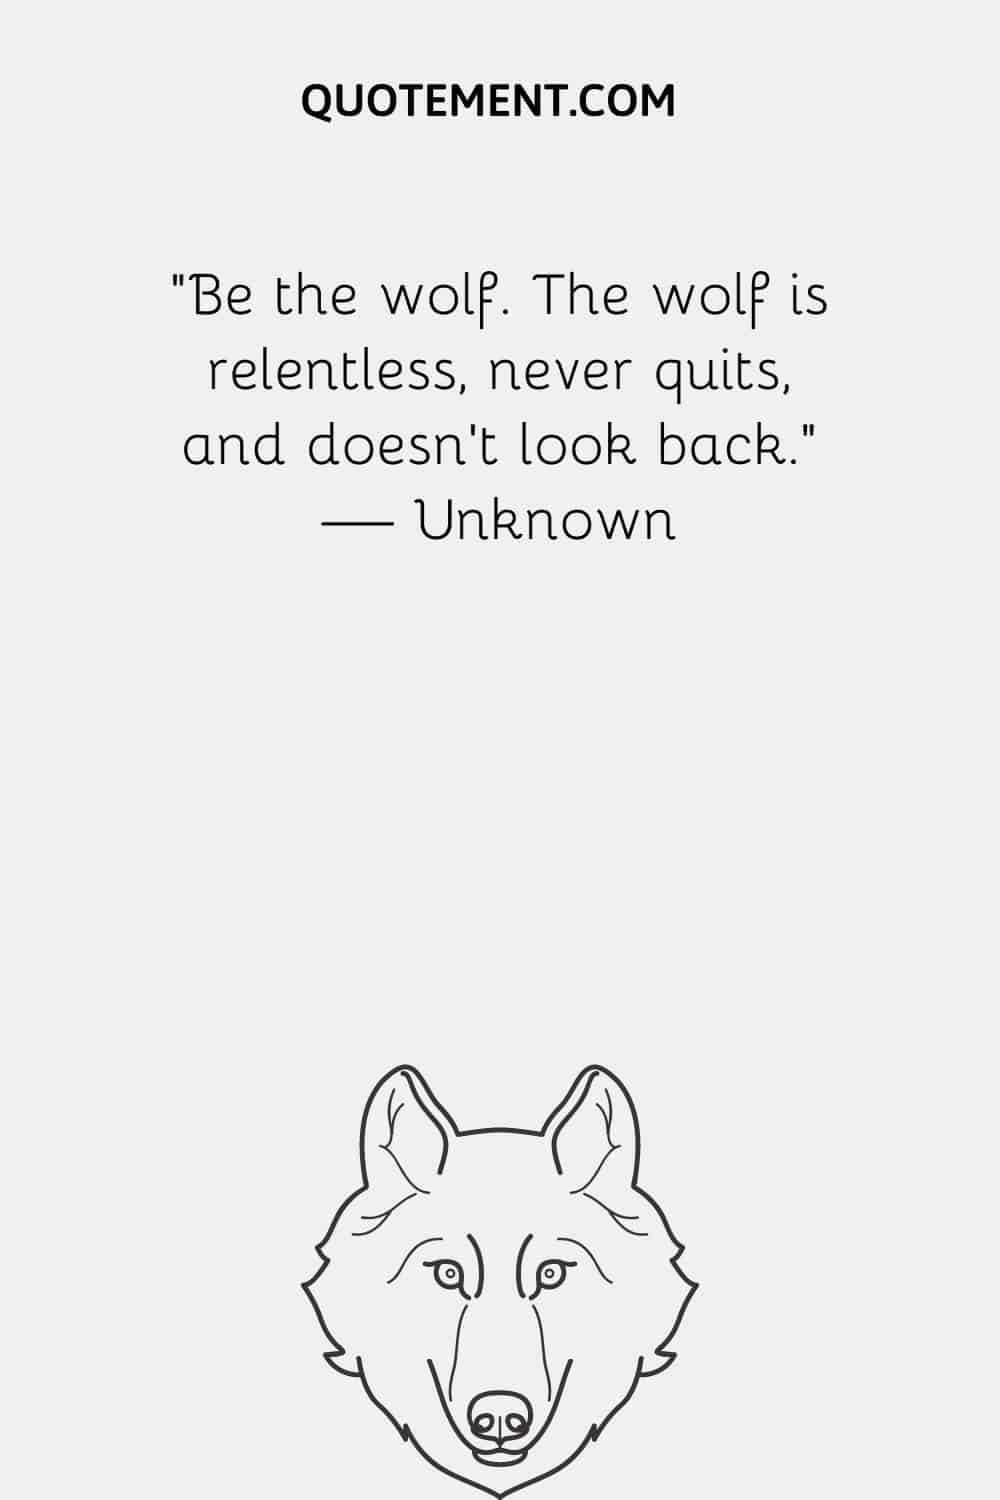 Be the wolf. The wolf is relentless, never quits, and doesn’t look back.